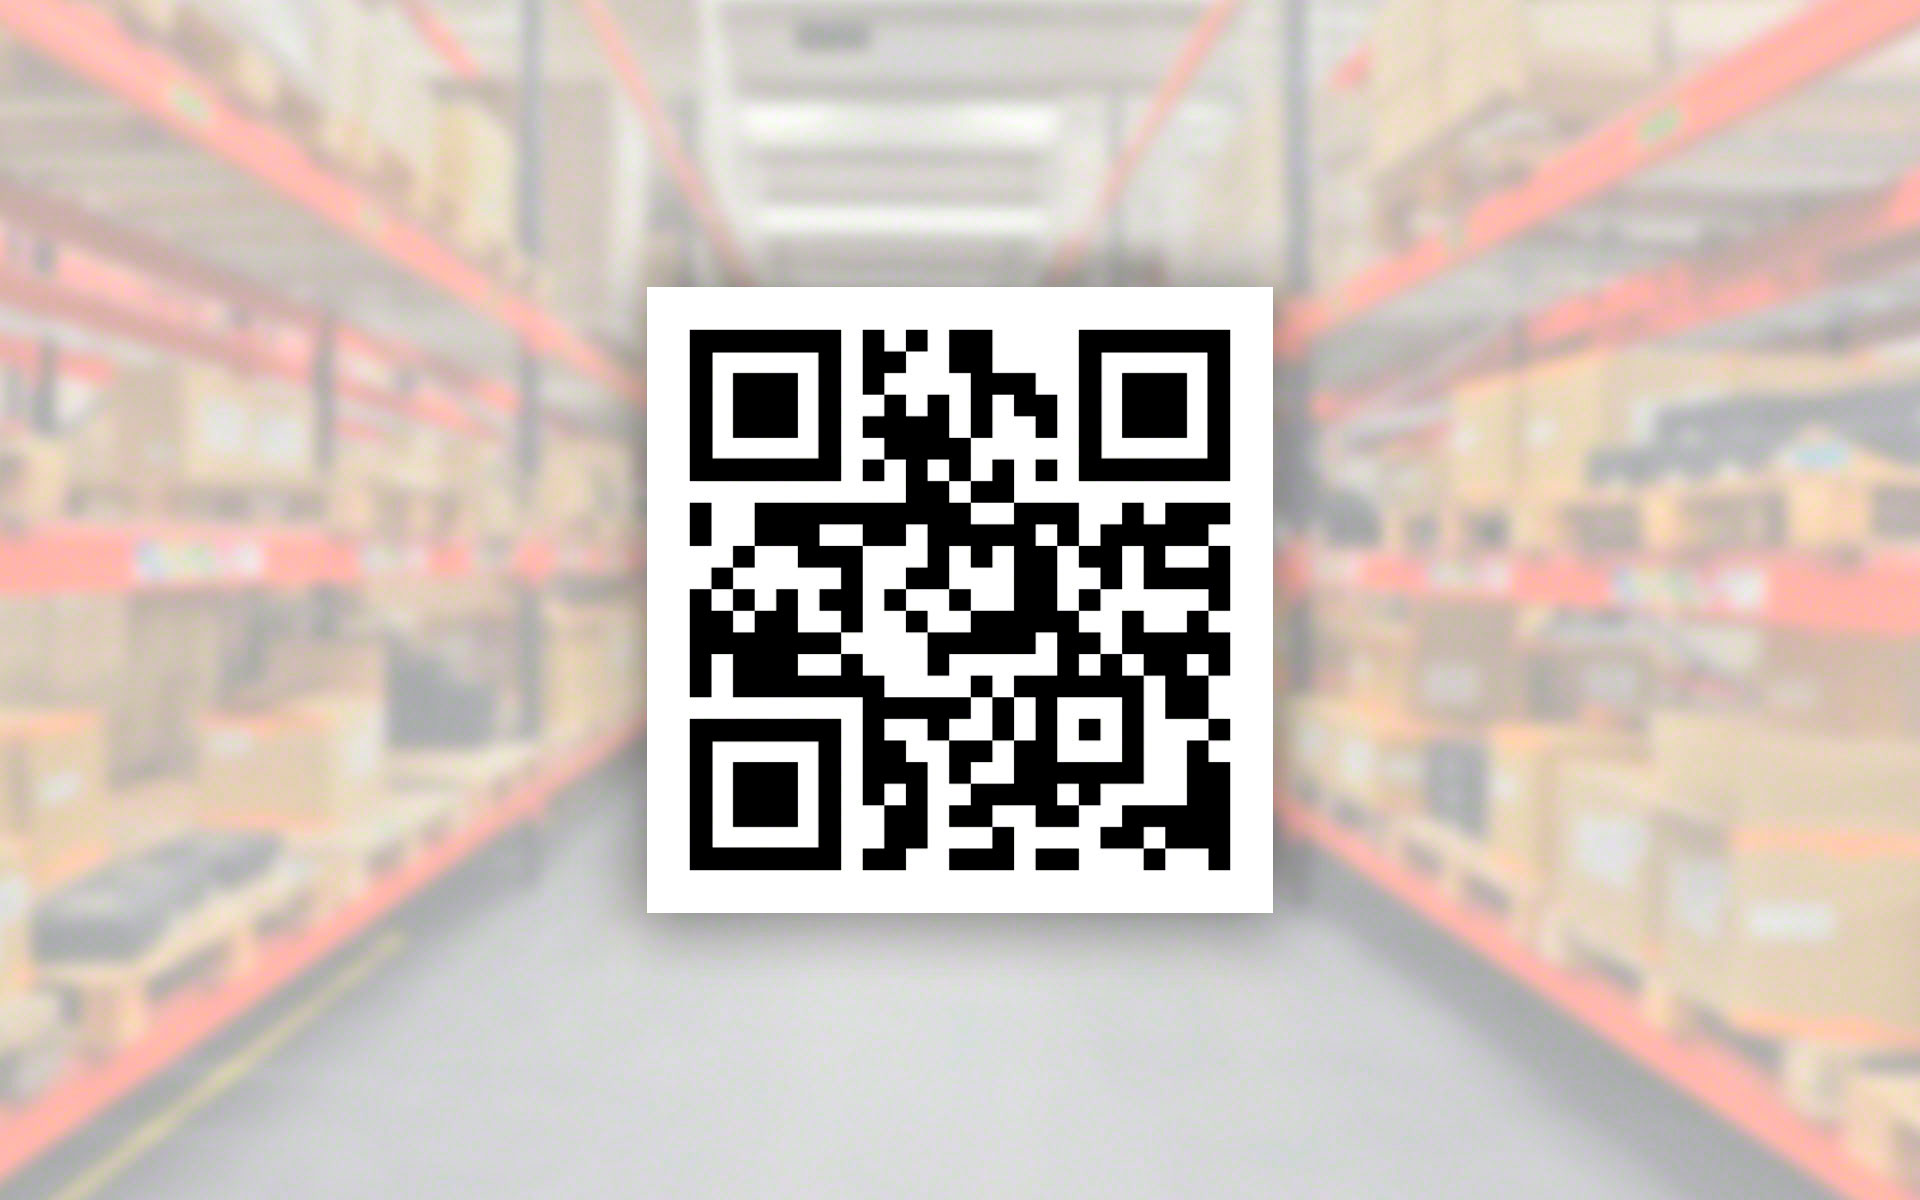 In logistics, QR codes provide more detailed information on products than barcodes